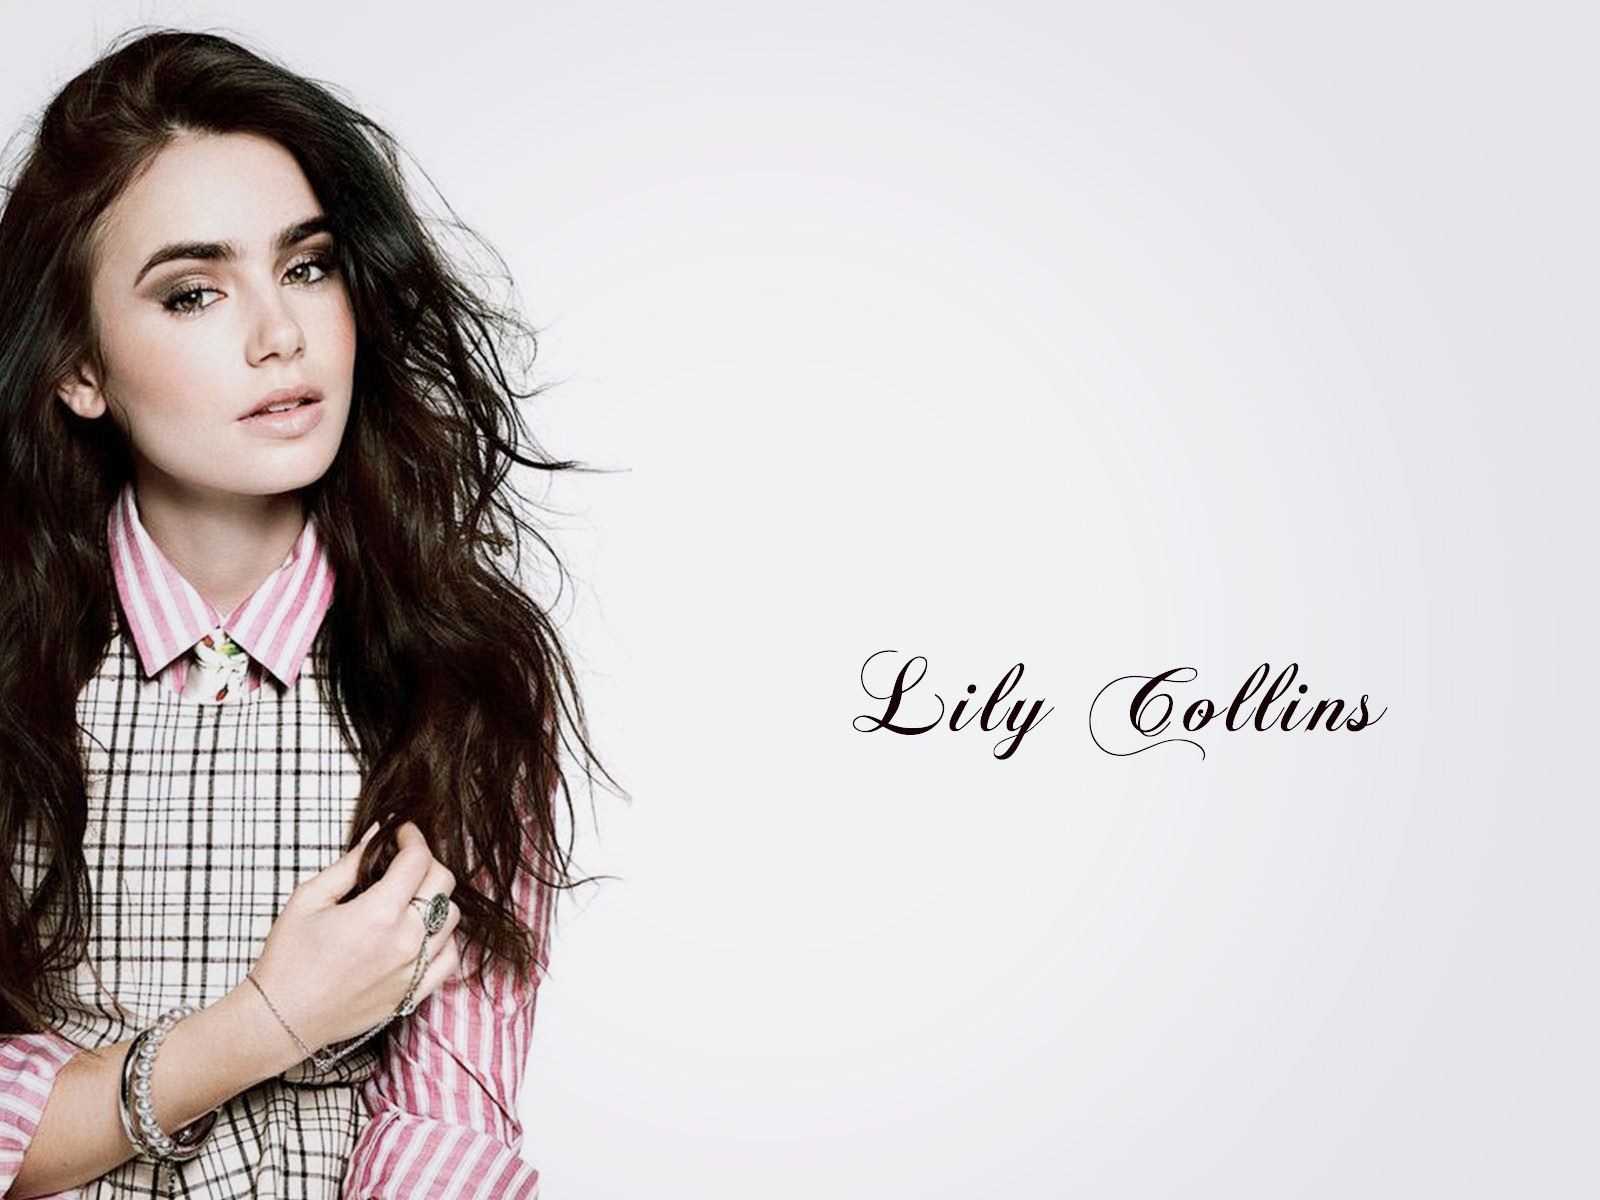 Lily Collins Wearing Check Shirt Wallpaper